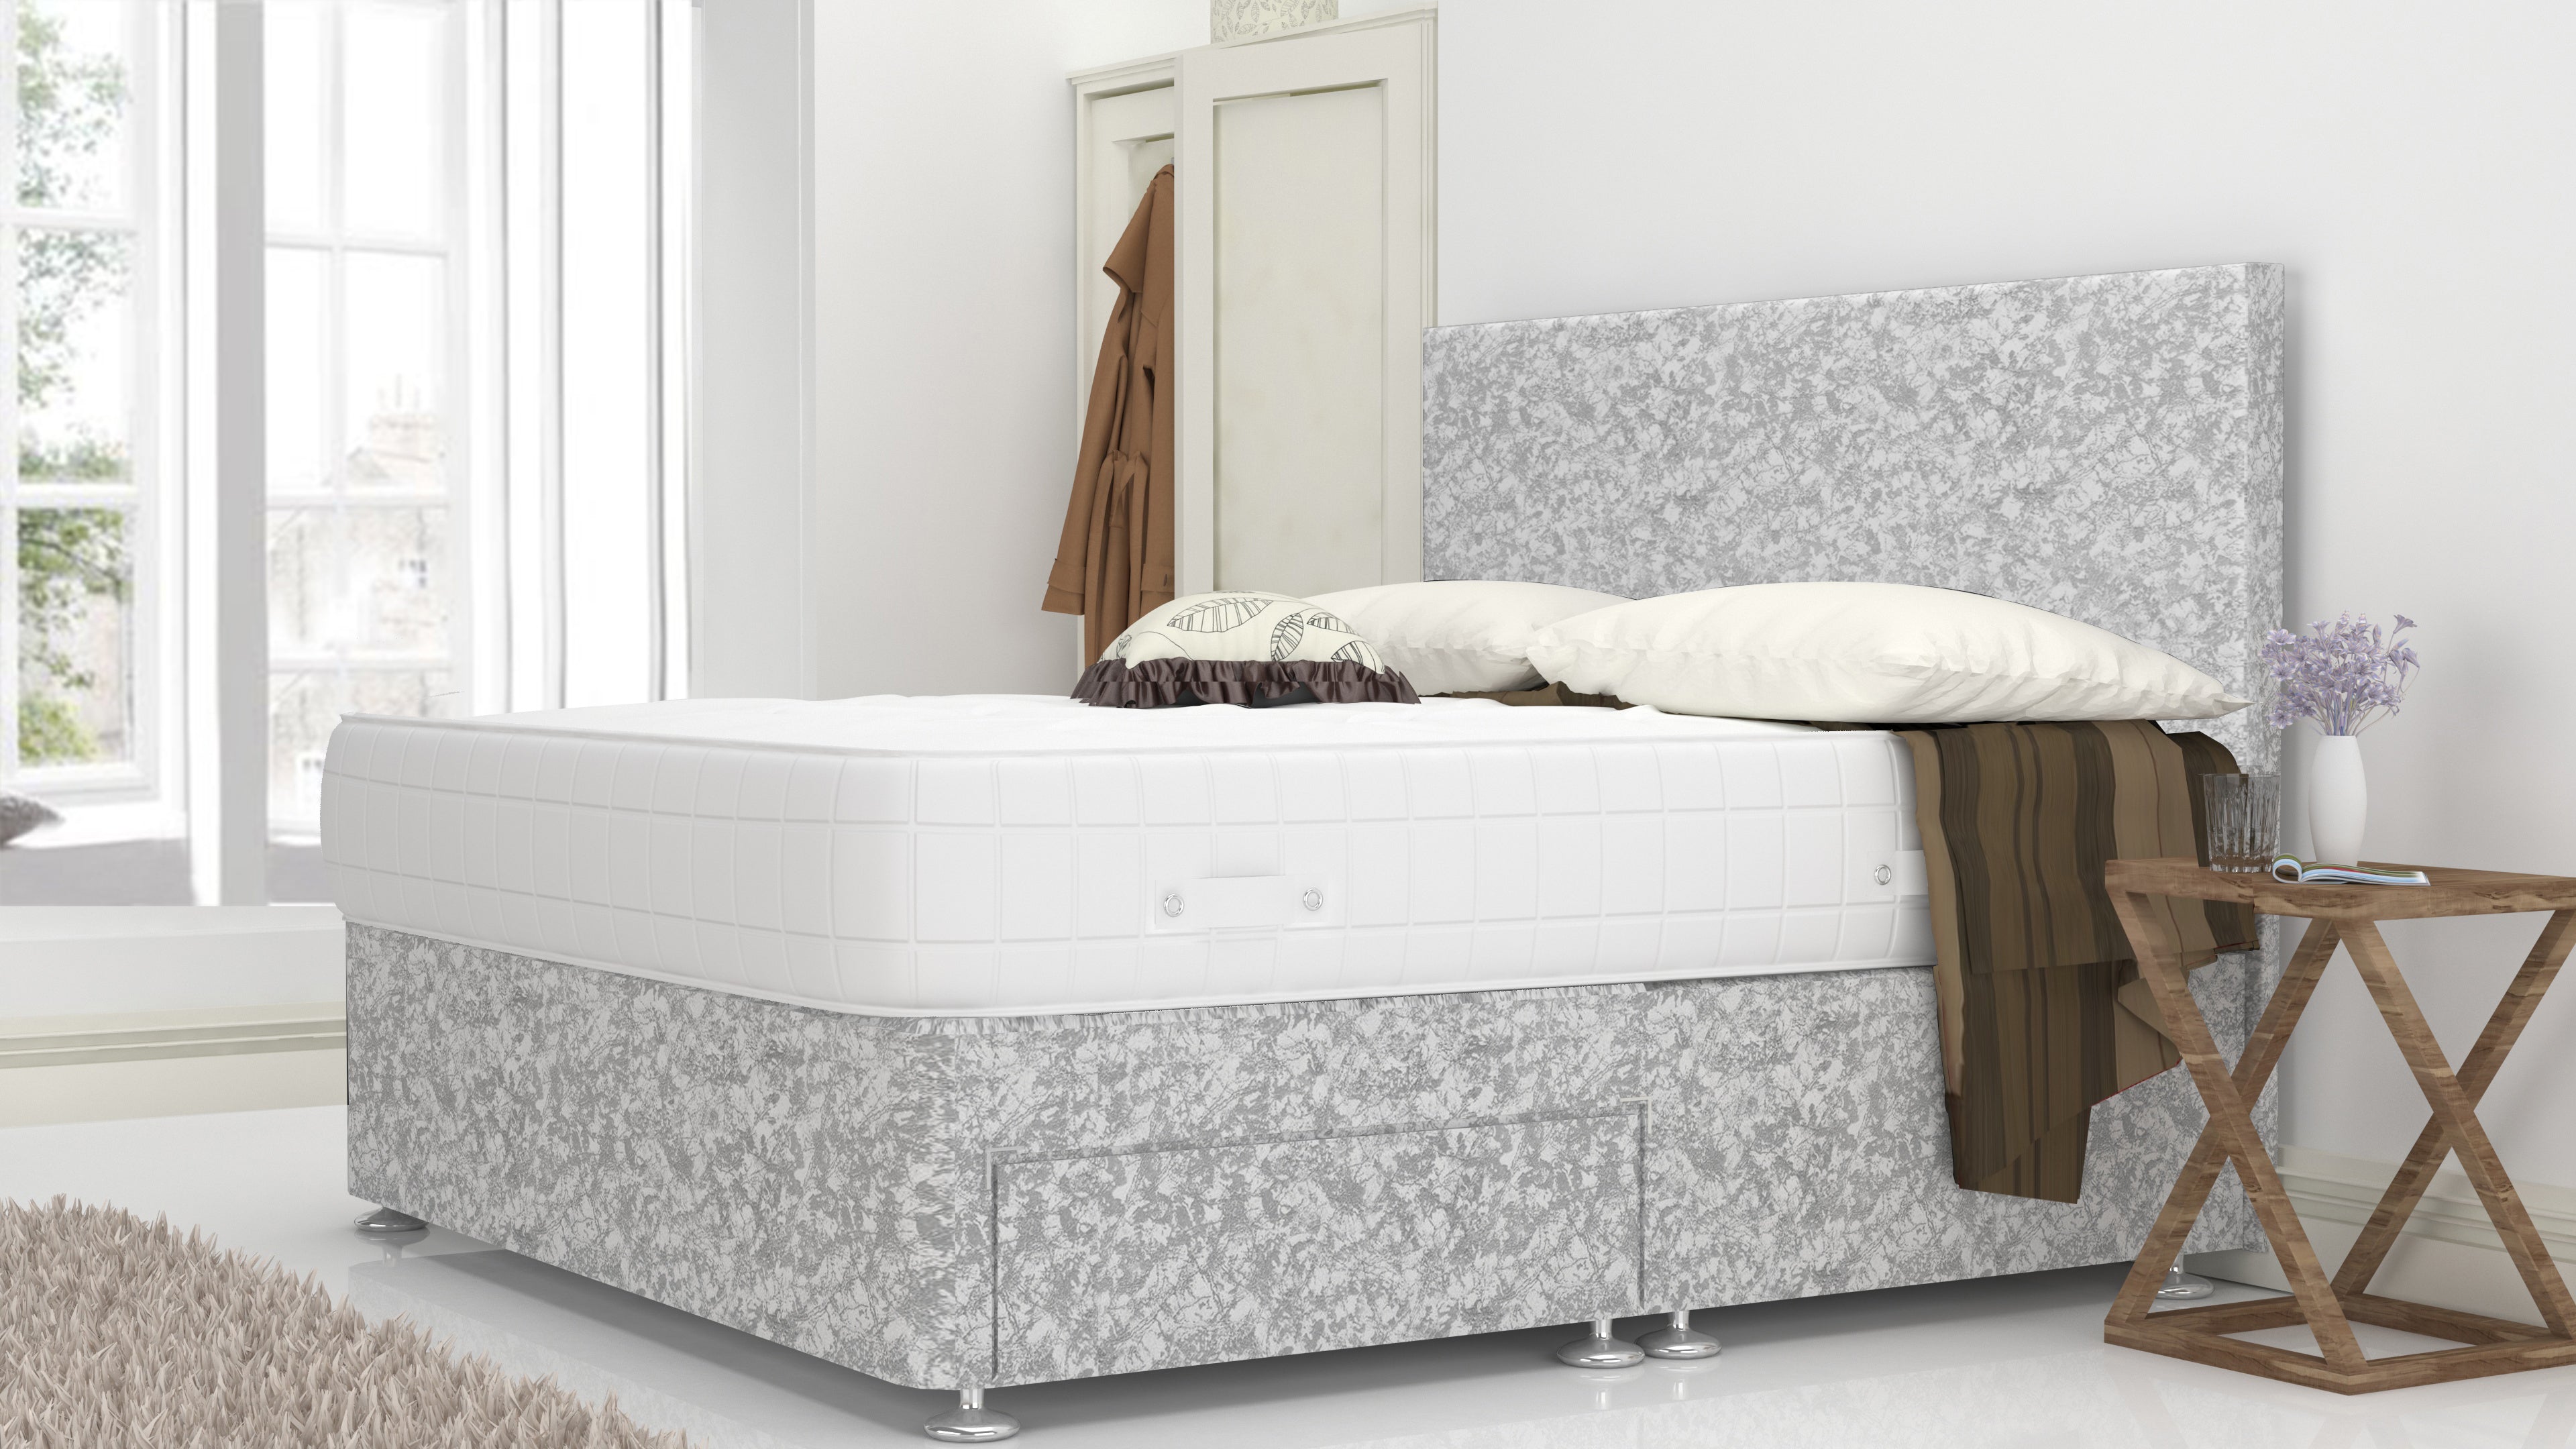 Silver Crushed 5 Feet Divan Bed Set With Plain Headboard Option (Included Feet) And Free Memory Foam Mattress